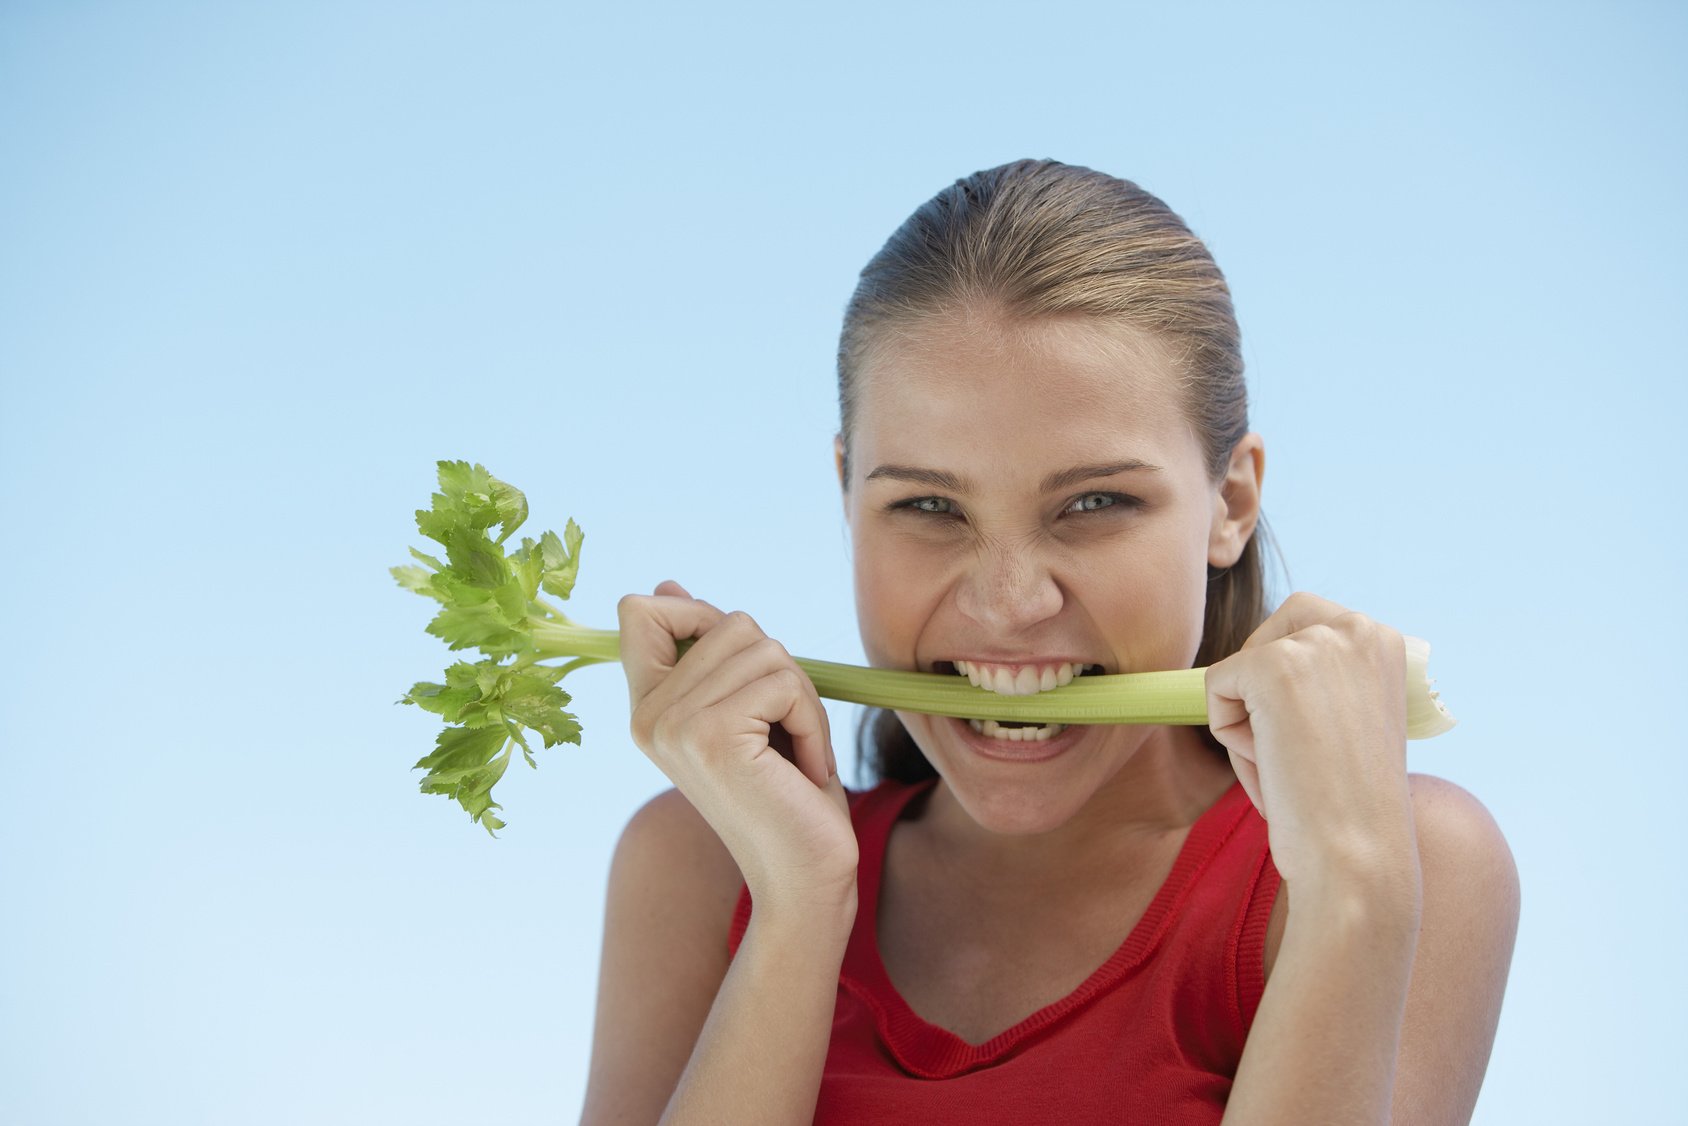  -rich, the chewy foods also keep teeth white and gum tissue healthy